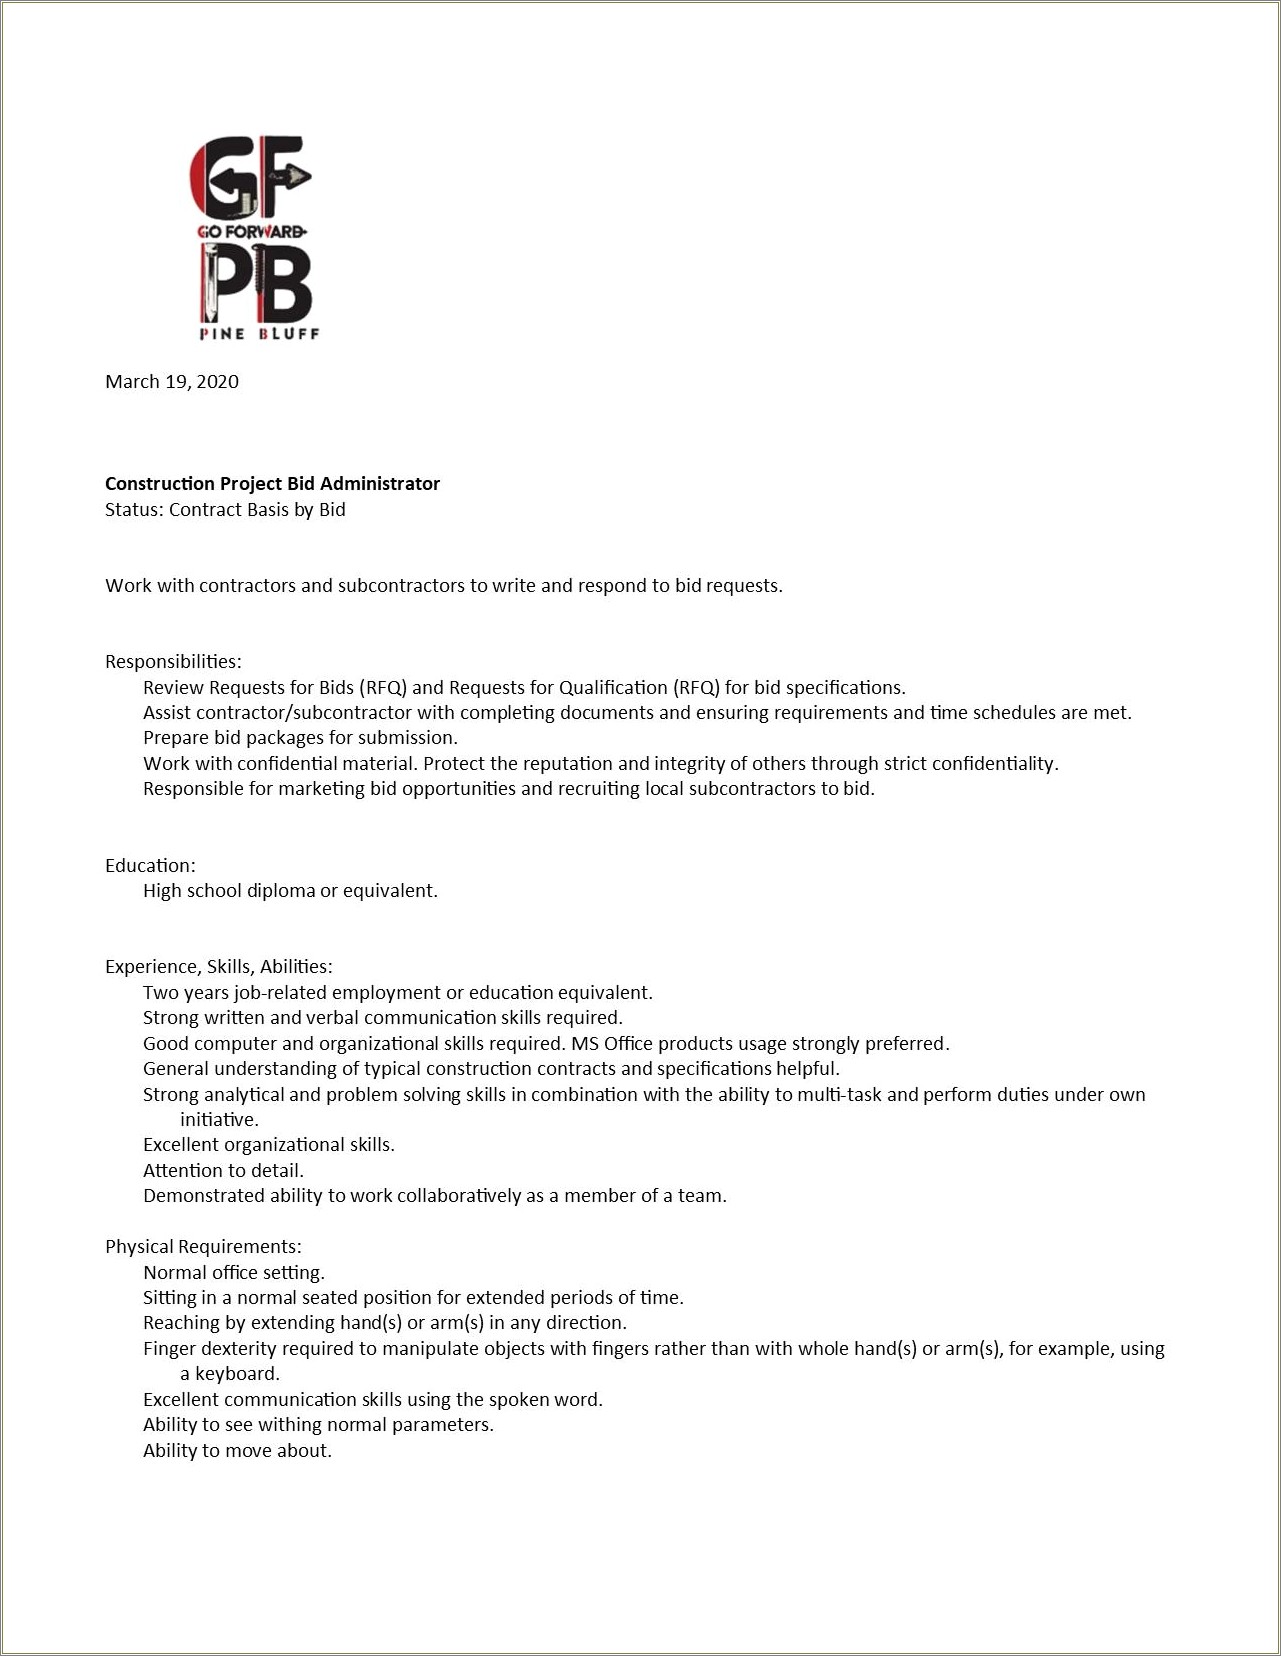 Resume With Subcontract Work And Regular Work